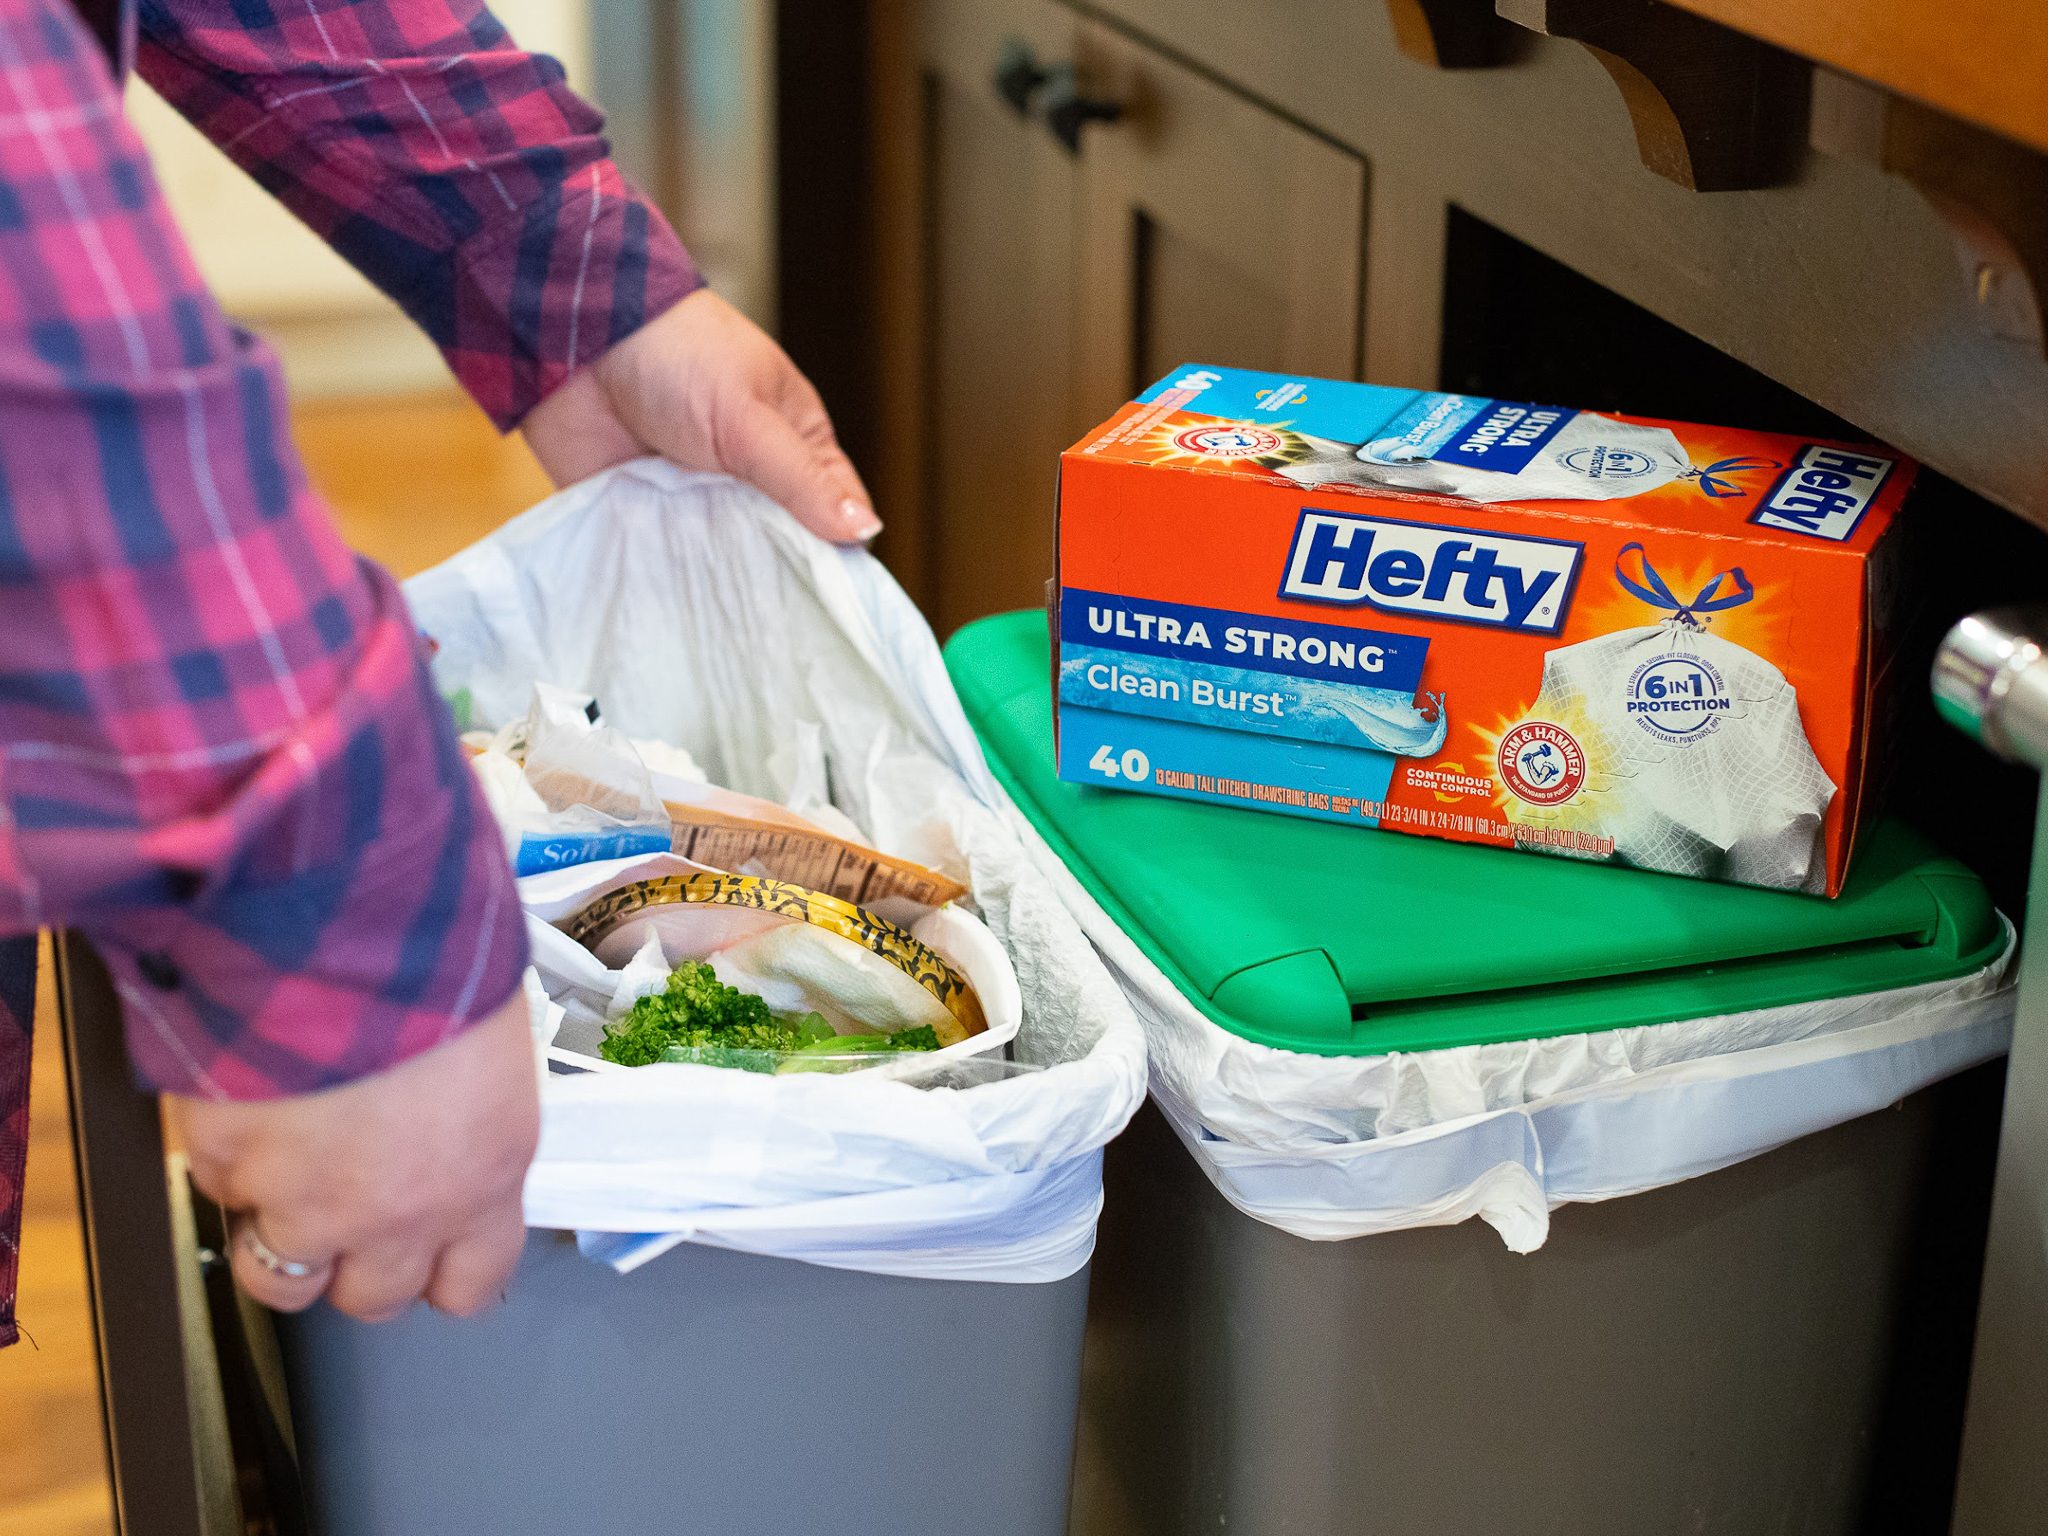  Hefty Ultra Strong Tall Kitchen Trash Bags, Fabuloso